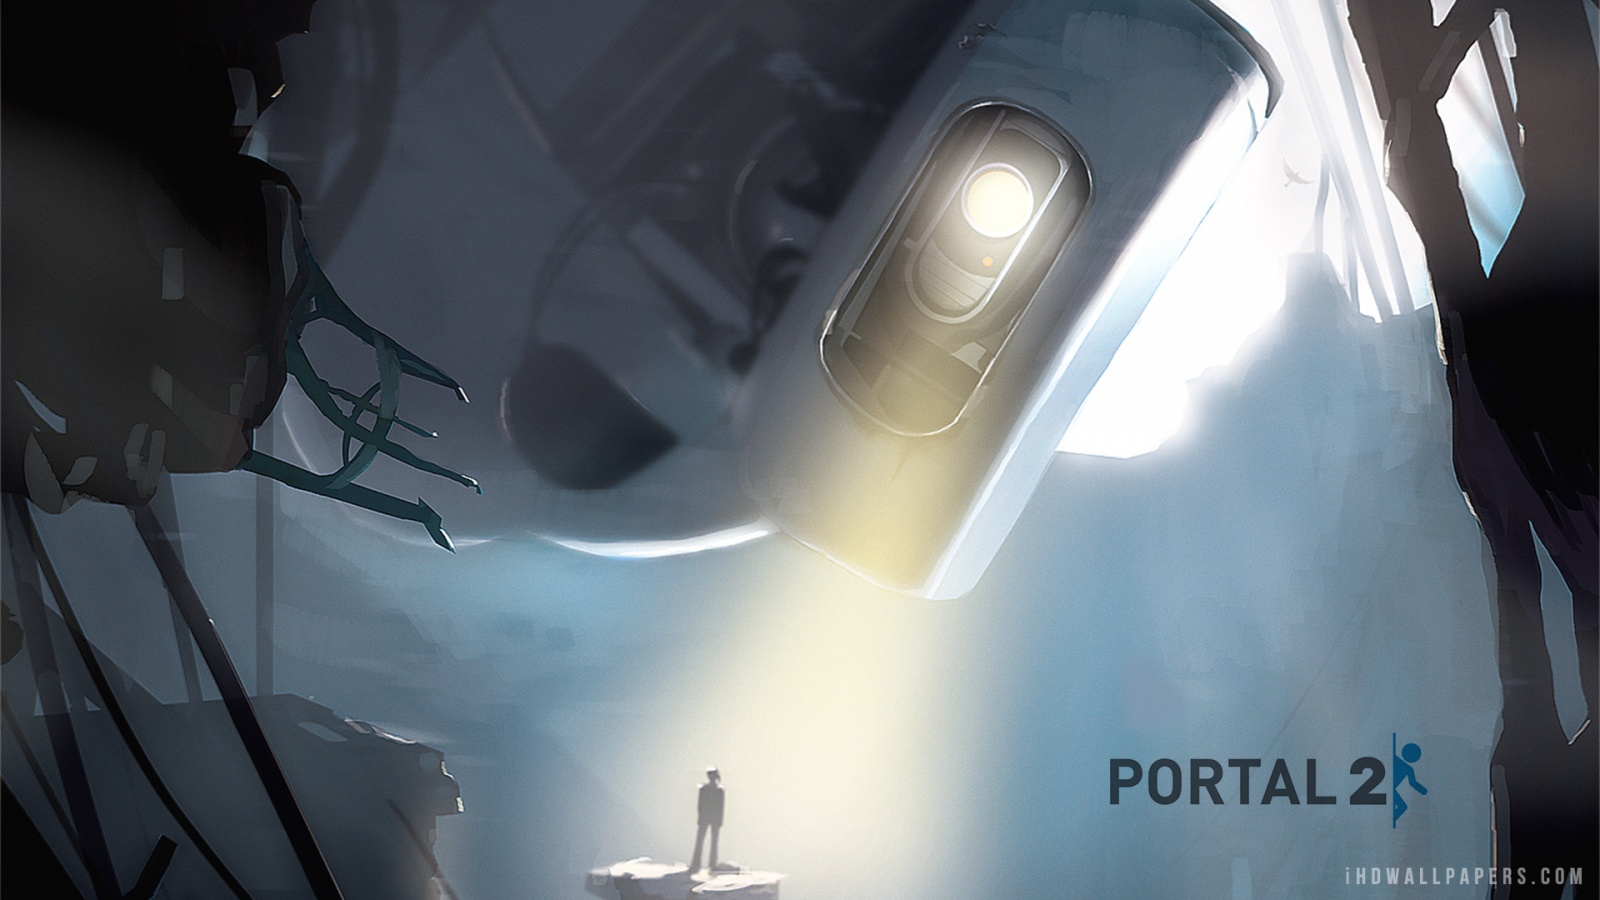 portal 2 glados background hd wallpaper Car Pictures